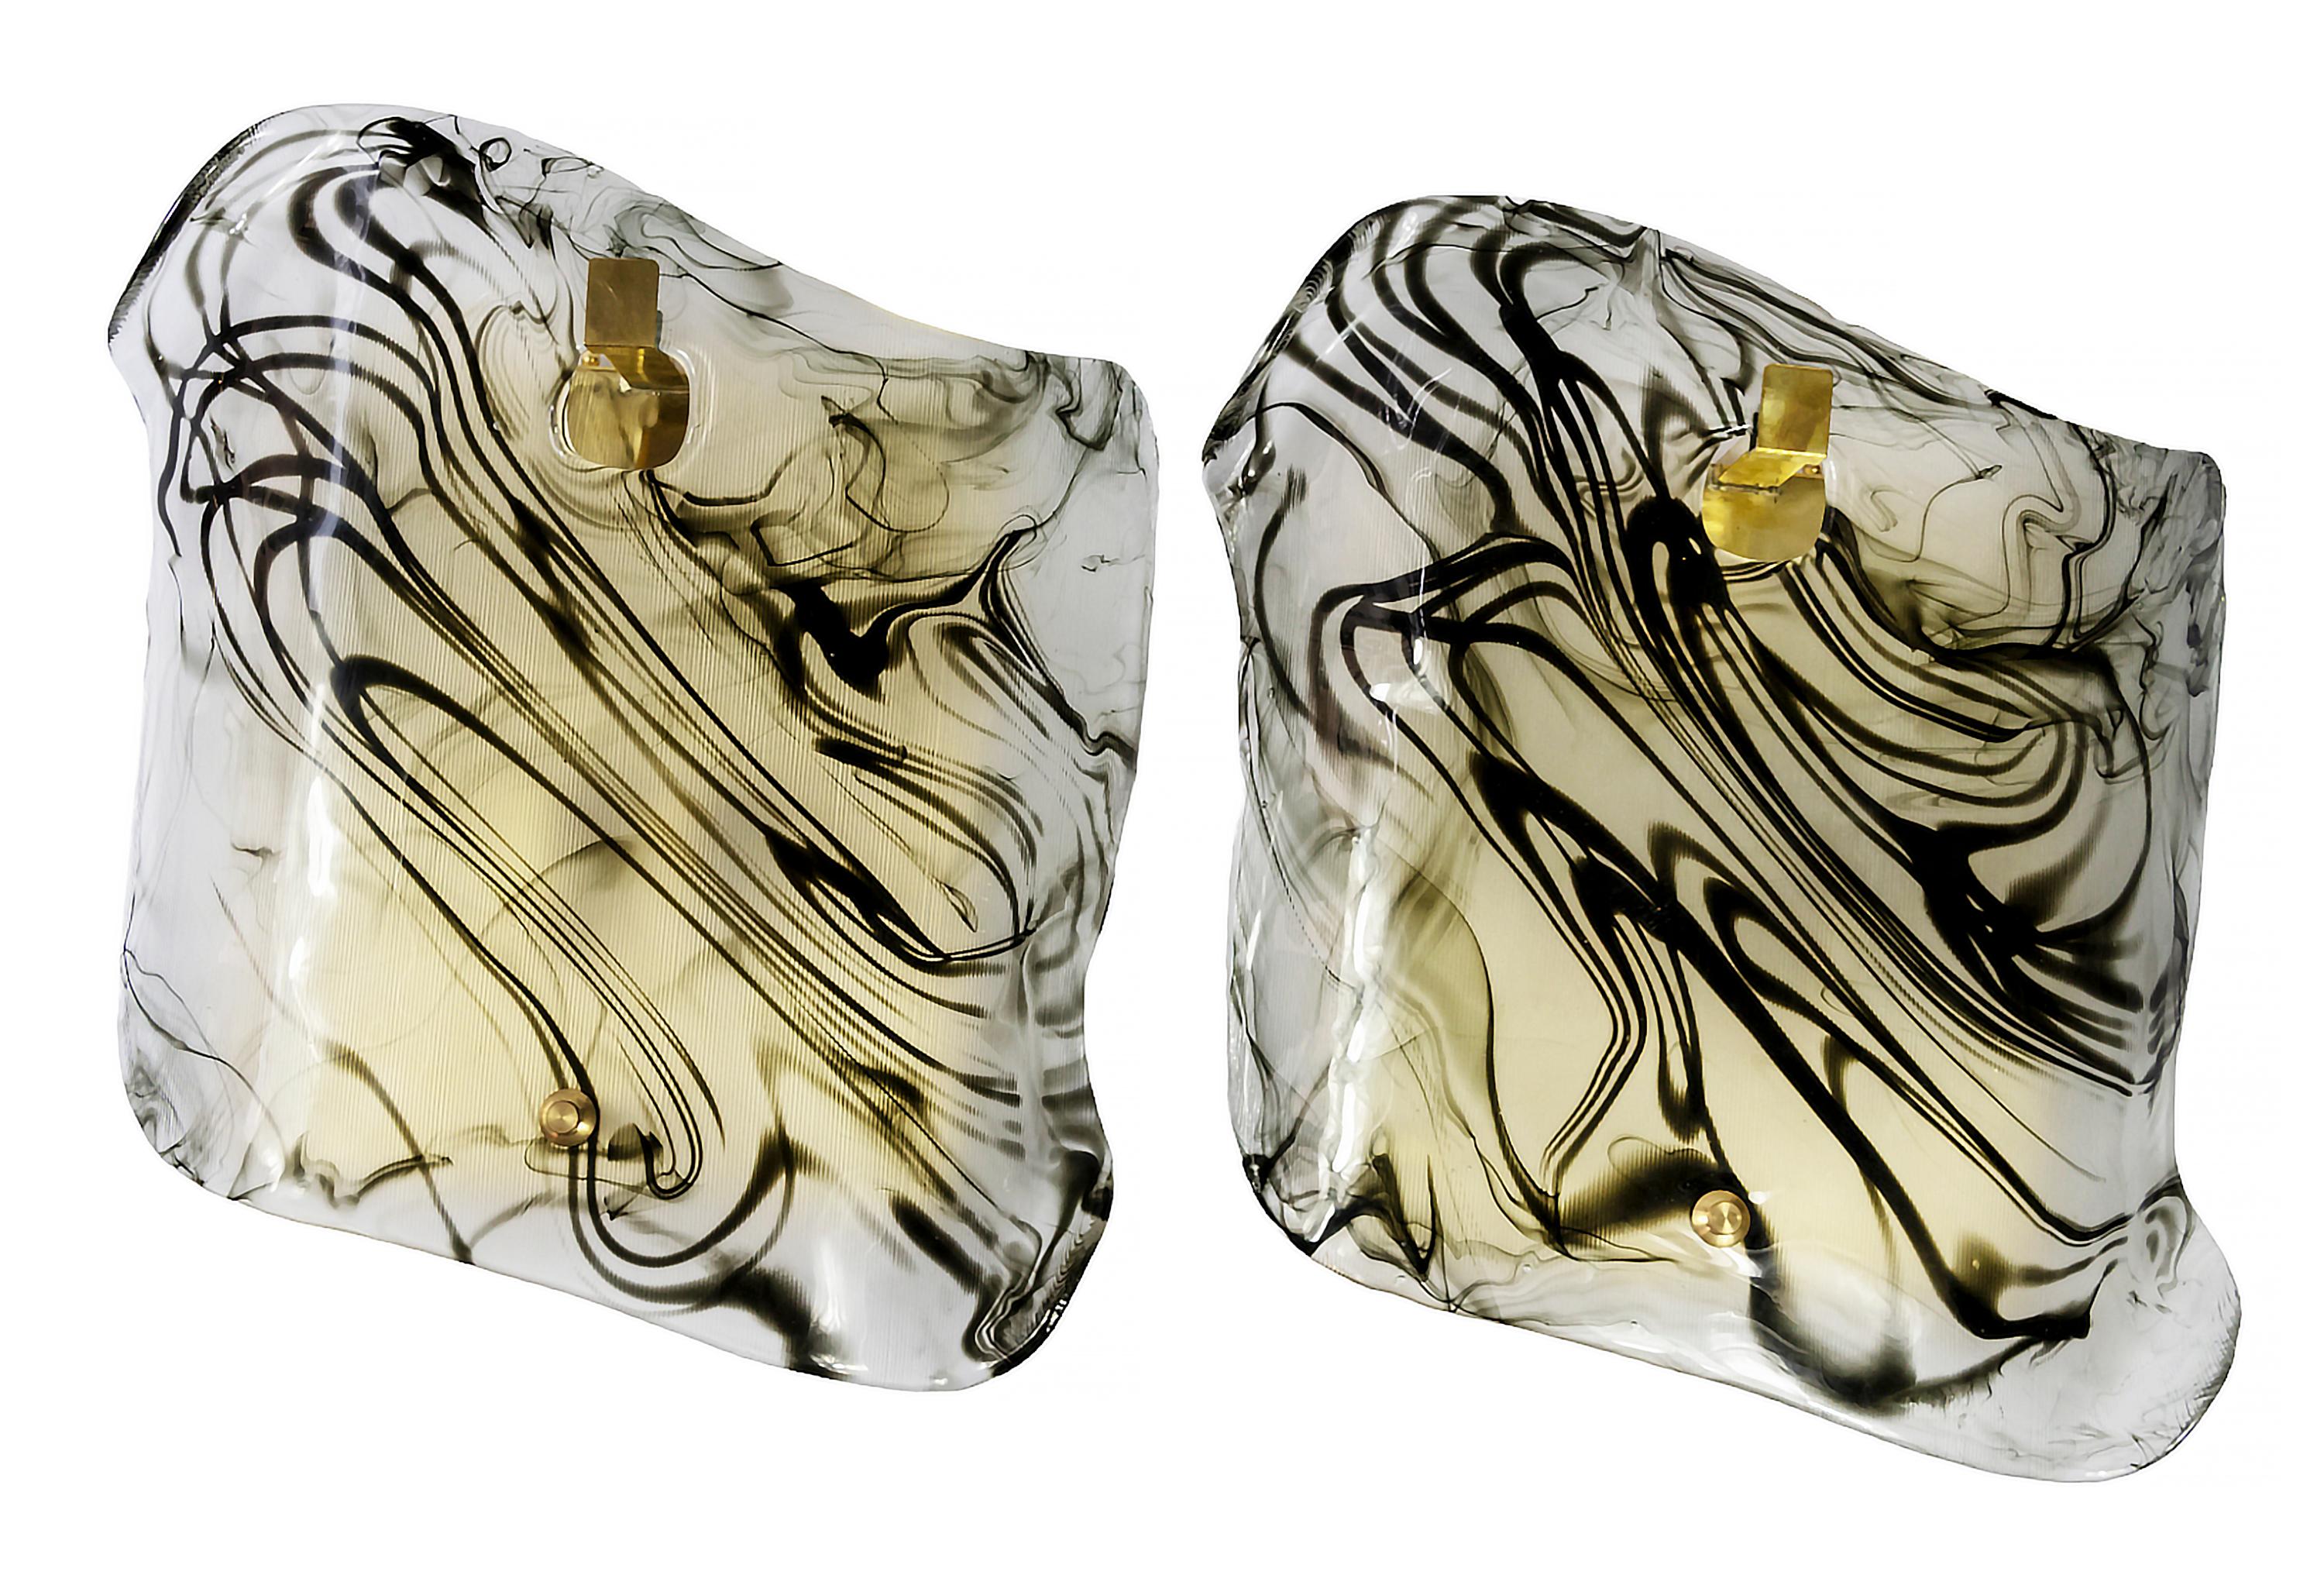 Pair of vintage Italian wall light sconces made of brass base decorated with handmade Murano glass. Each Murano glass is unique, semi-transparent, light ivory-white and dark brown/black color.
Bulbs are E14, 2 pcs. in each.
Very solid and heavy.